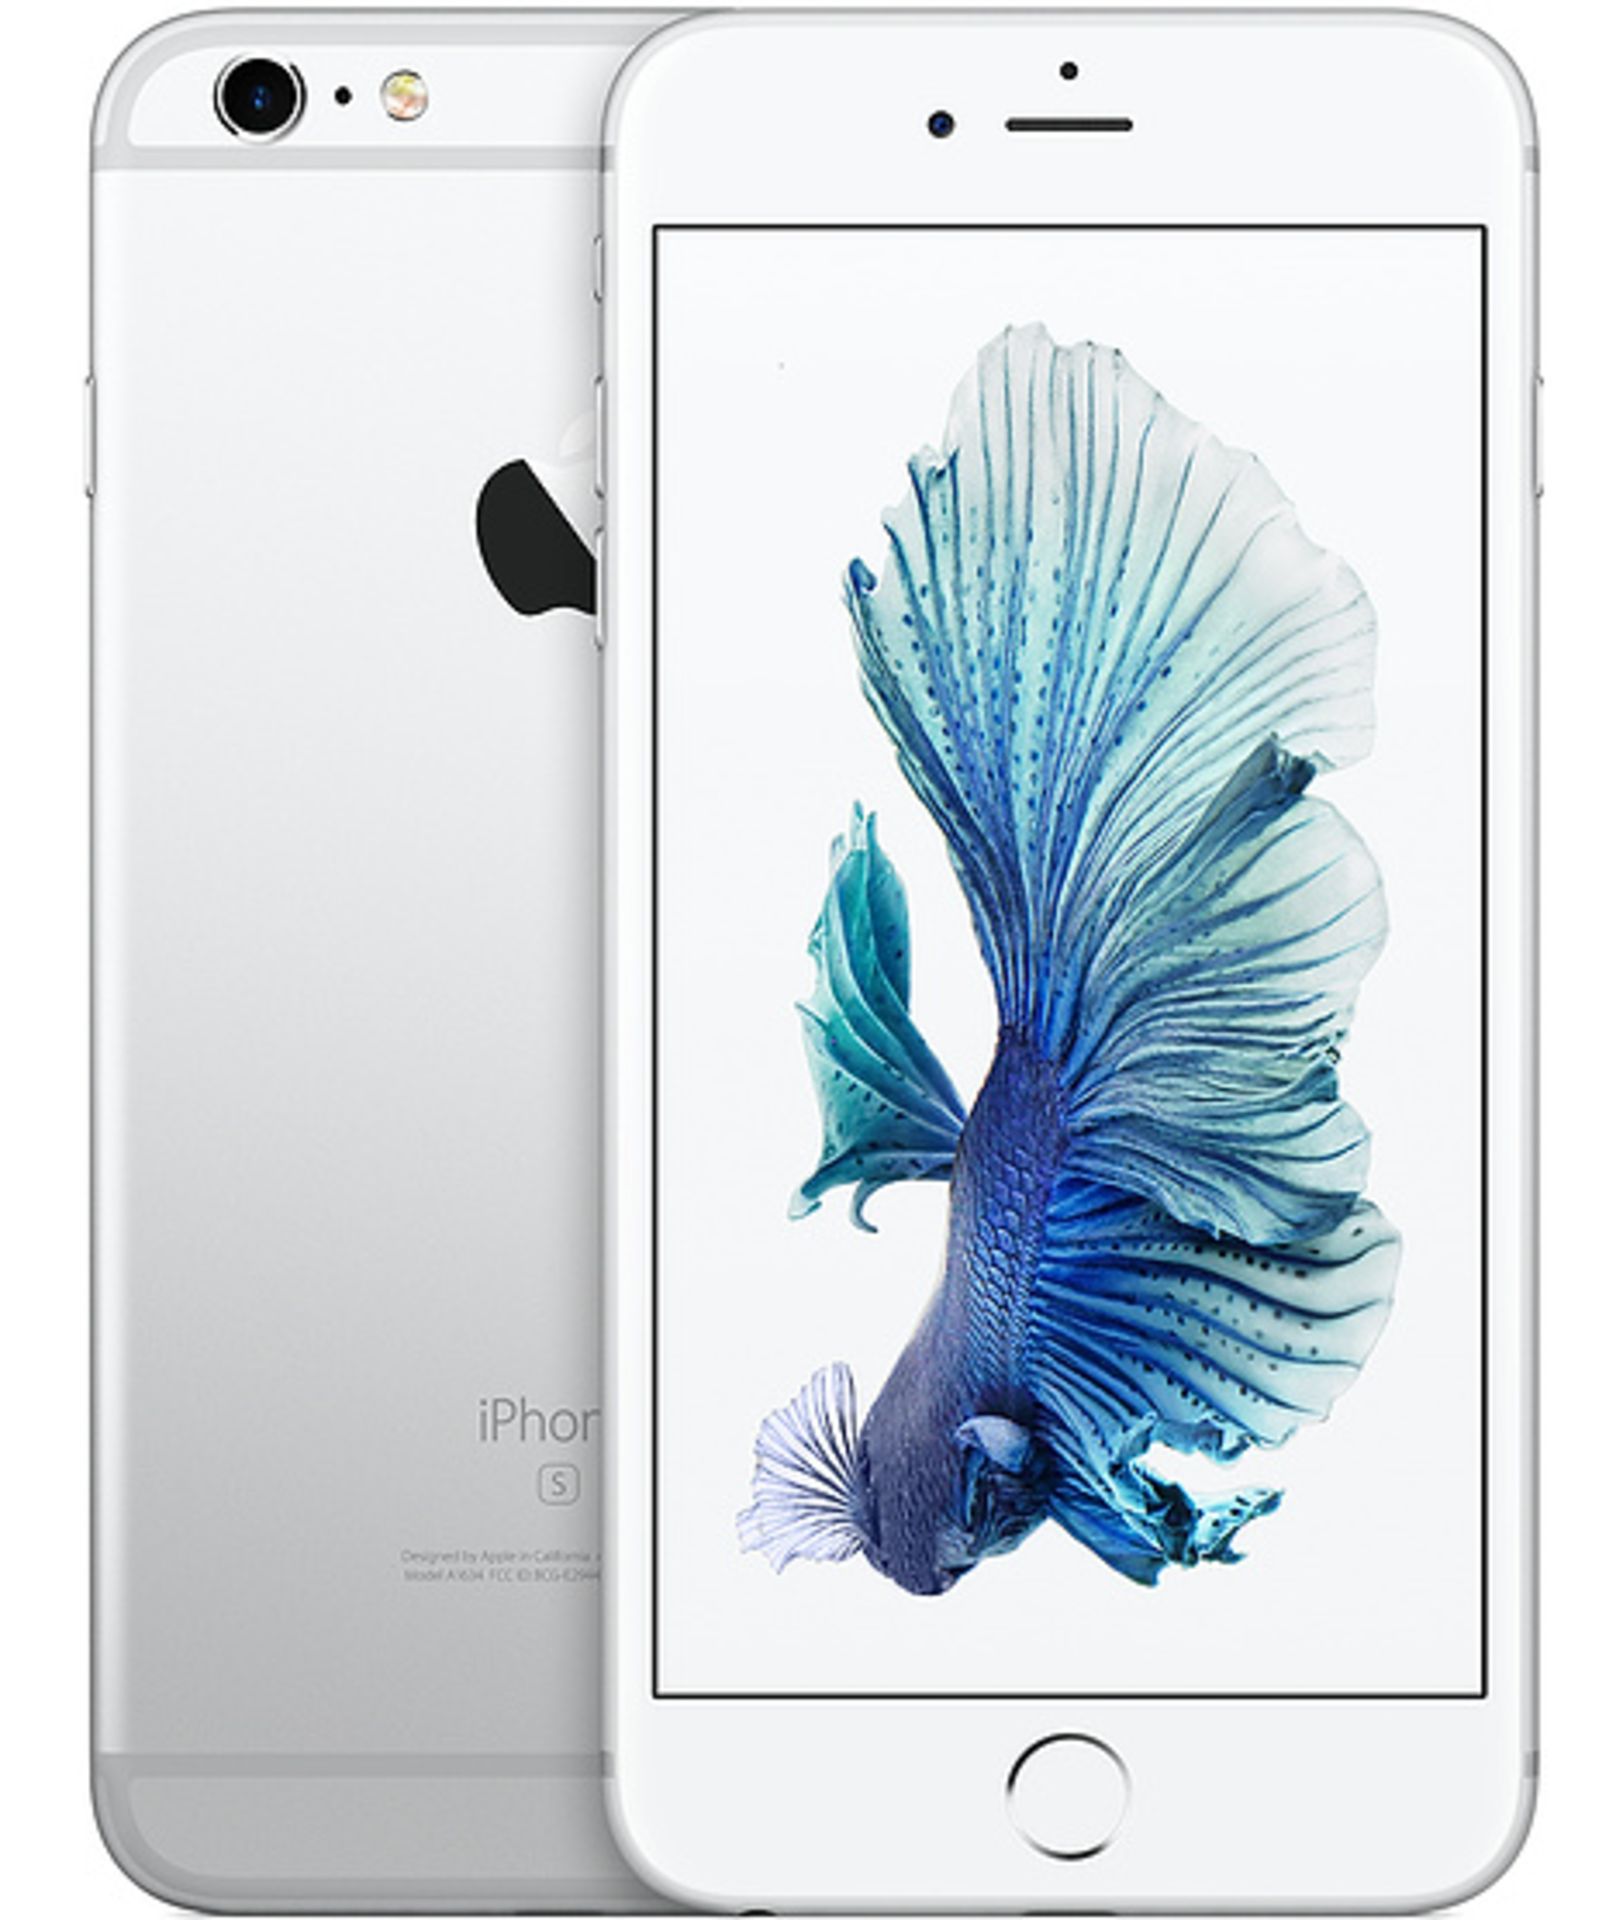 Grade A Apple iPhone 6s 16GB - Silver - Touch ID - Dual Core - IOS - 12MP Camera - Apple Box With